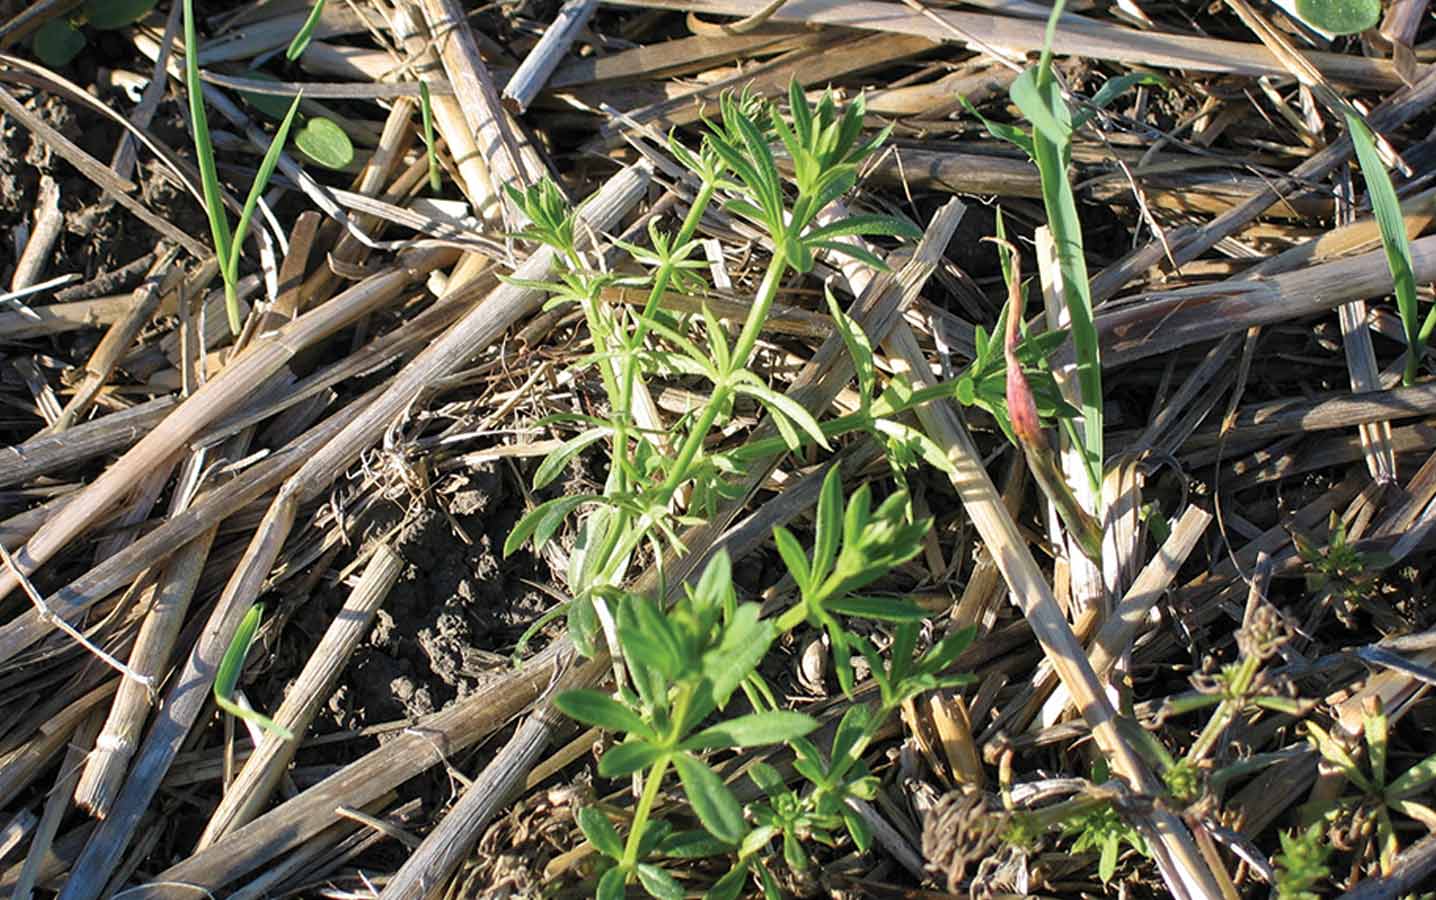 Cleavers species are difficult to control and can cause downgrading and reduce crop quality.